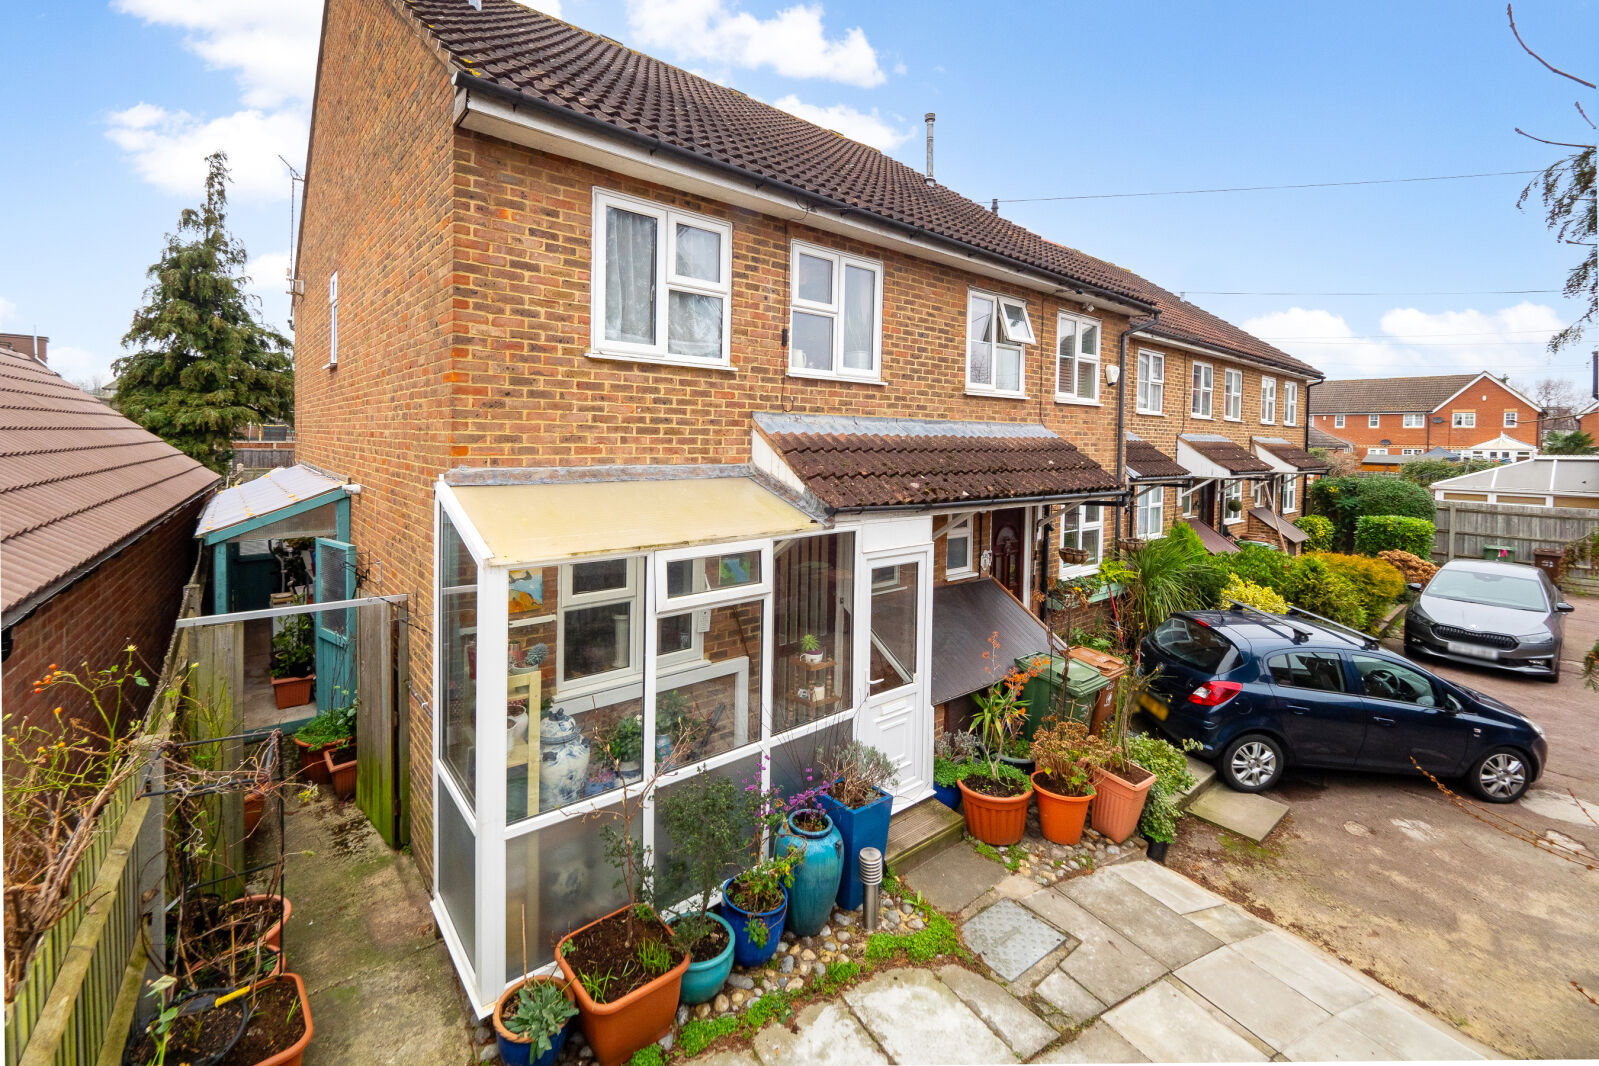 3 bedroom end terraced house for sale Sutton Common Road, Sutton, SM3, main image